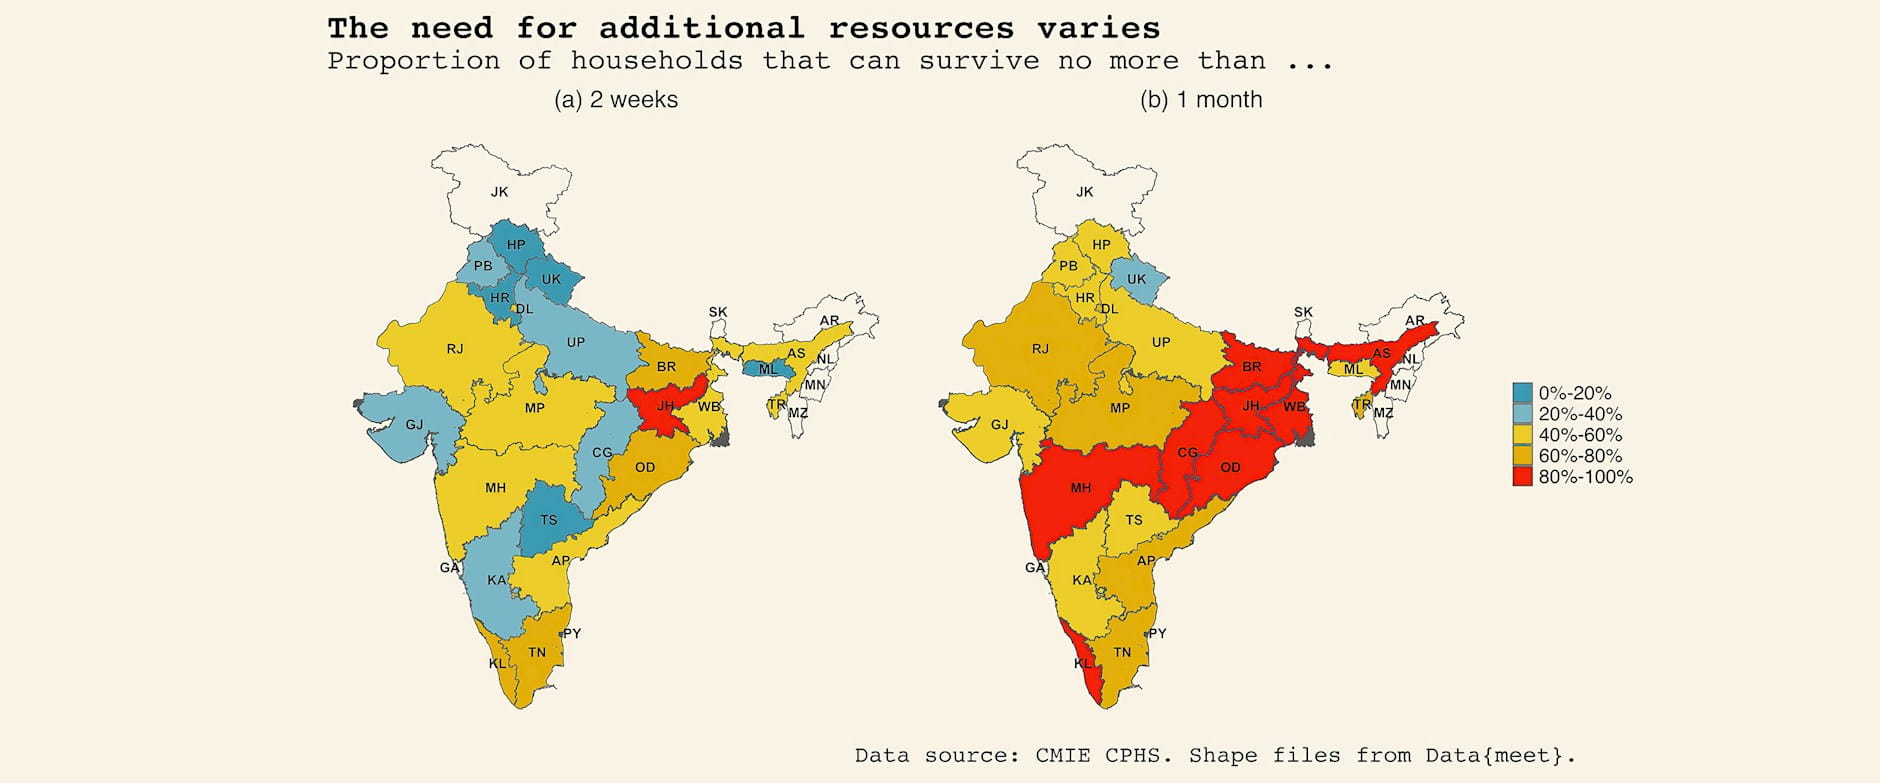 Figure showing the varying needs for resources by region